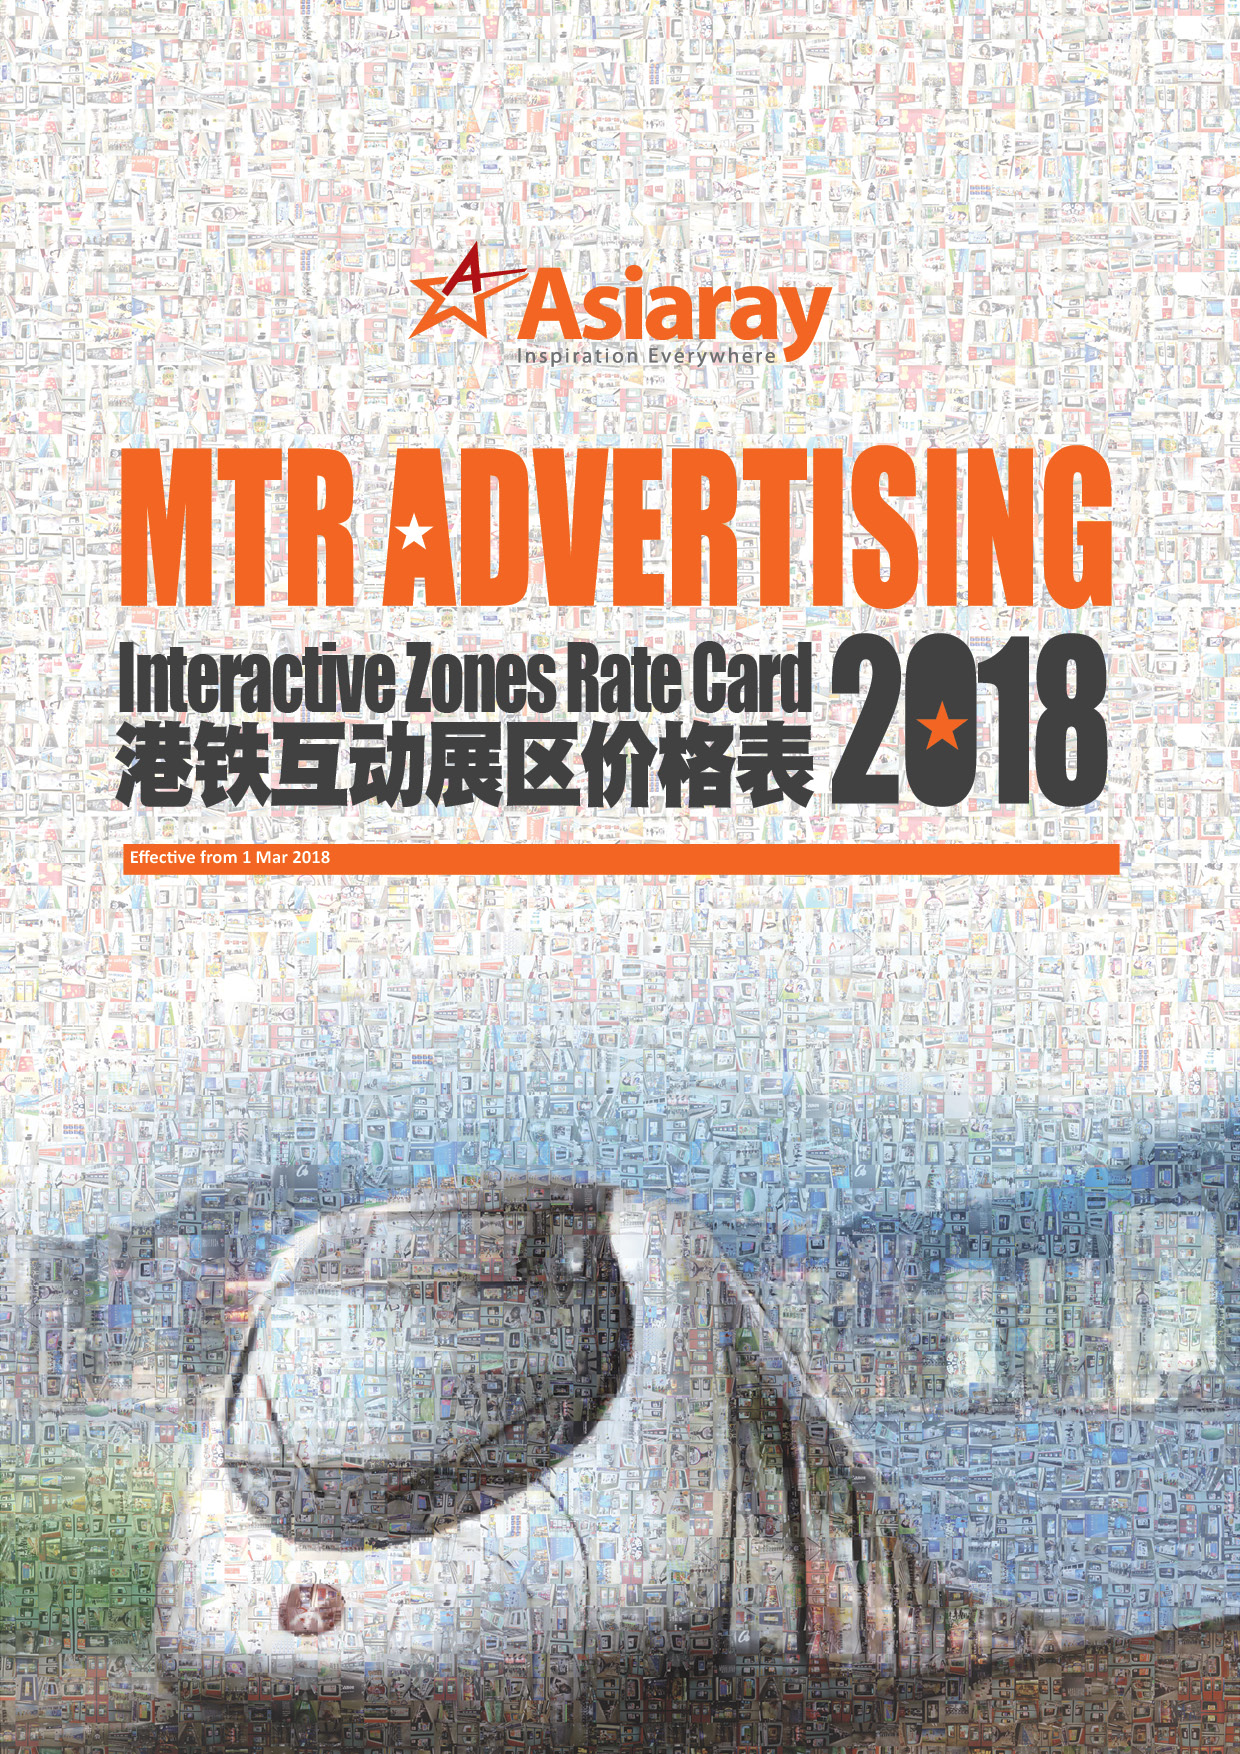 MTR Interactive Zones Rate Card 2018